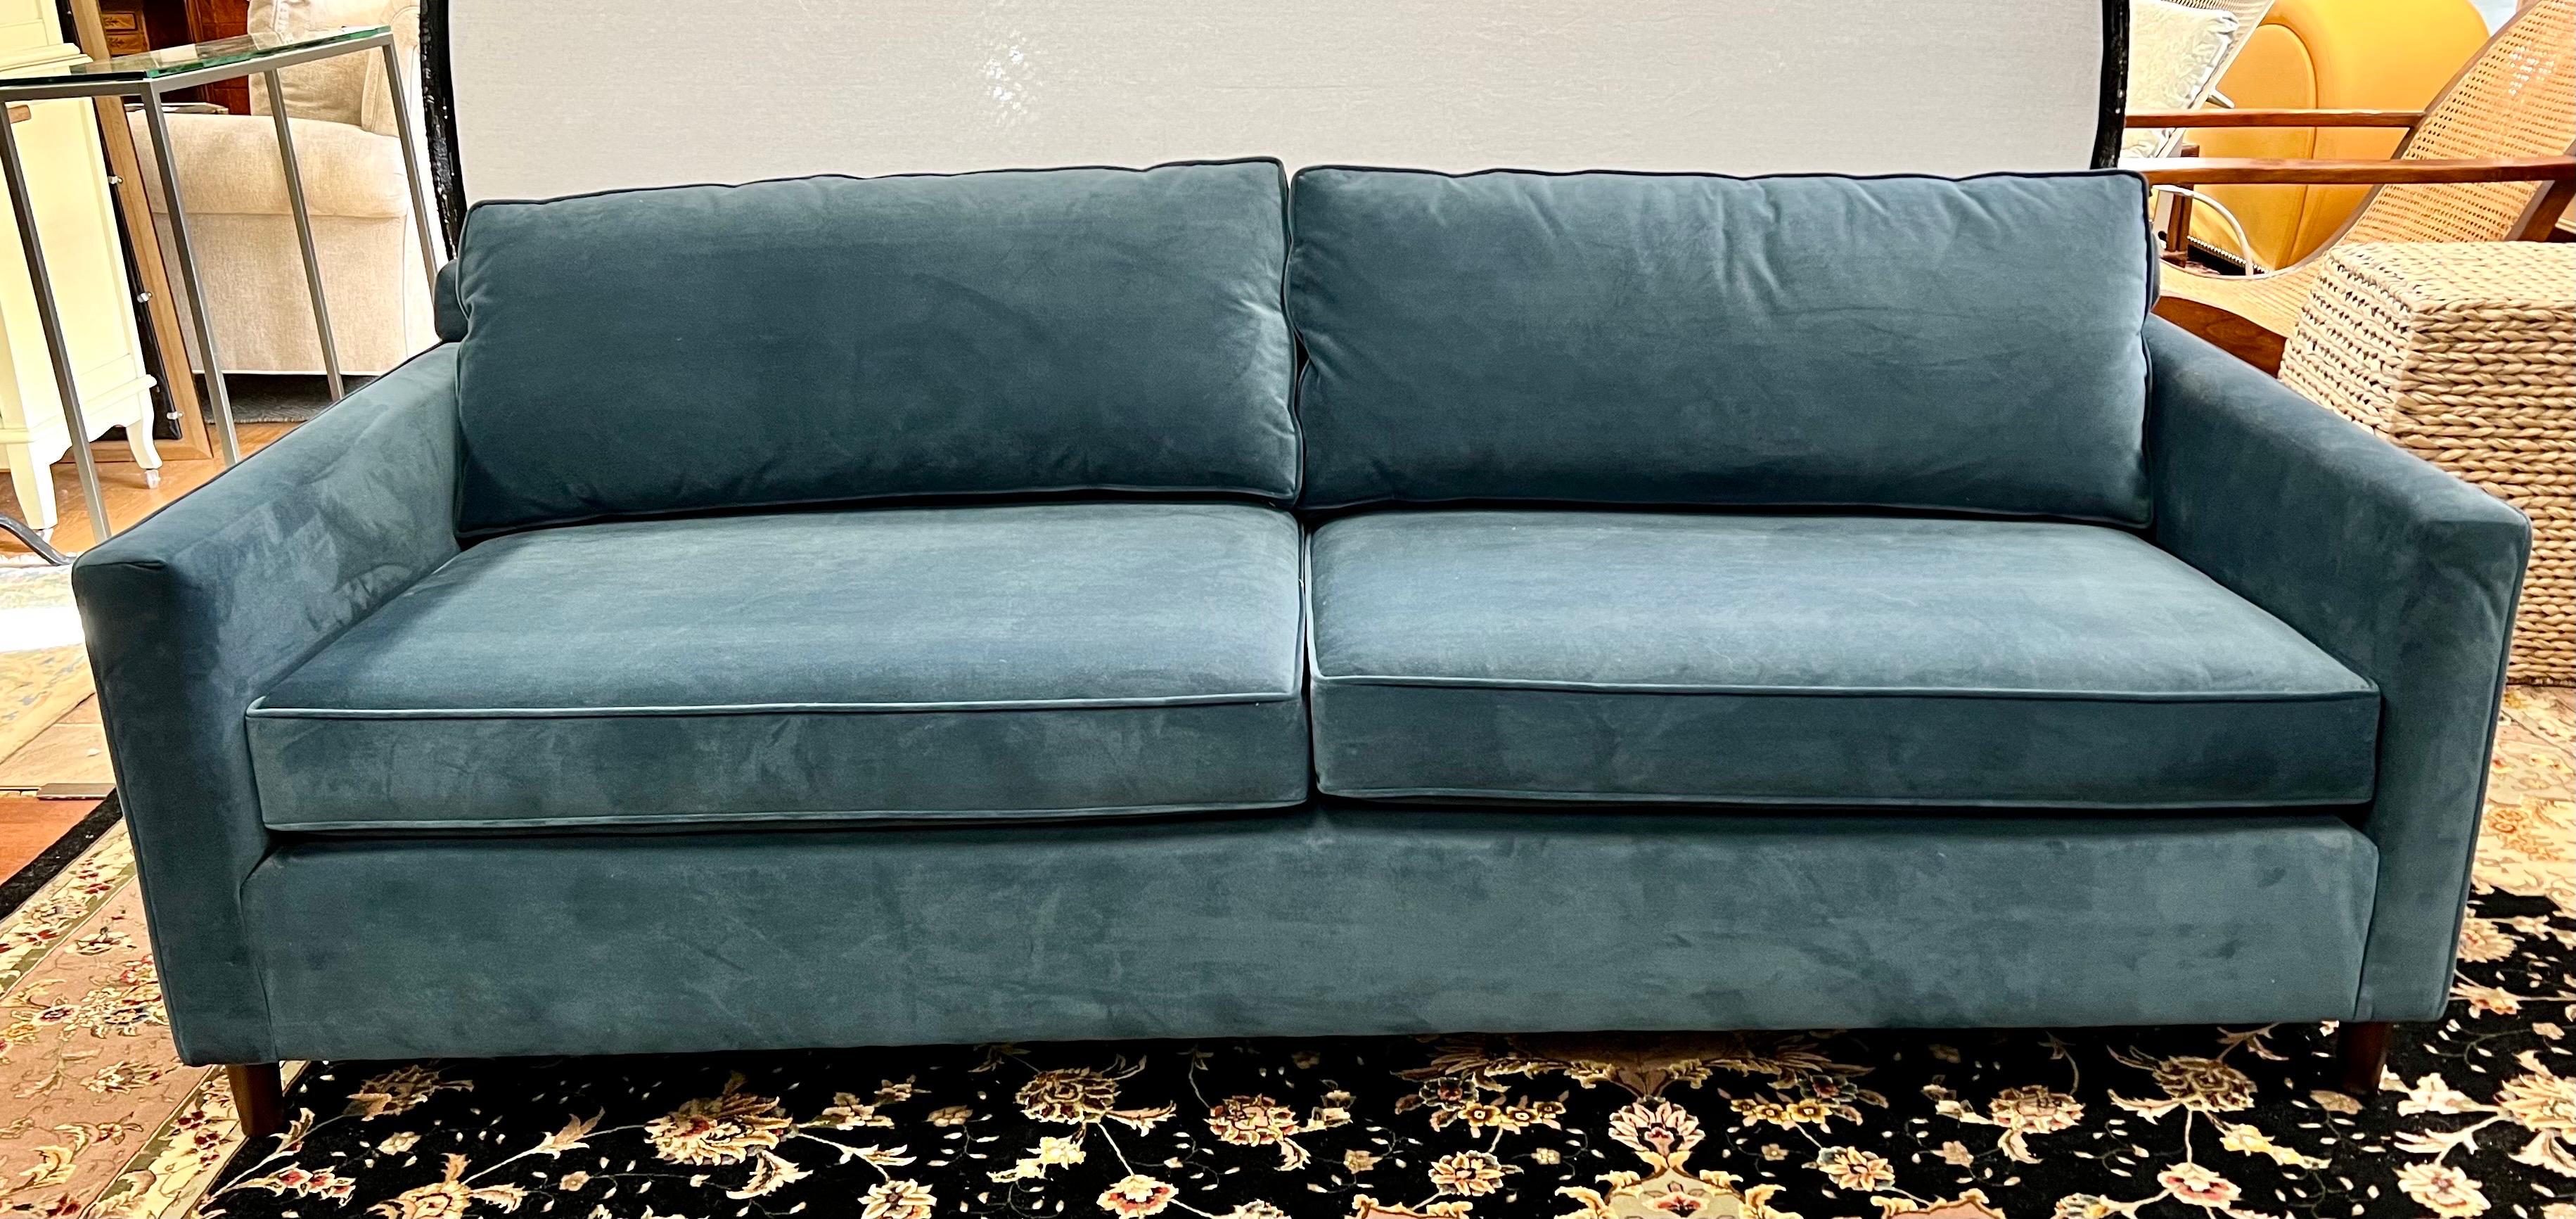 Elegant matching pair of blue velvet sofas by Mitchell Gold.  Features eight way hand tied construction, gorgeous velvet fabric and an incredible shade of blue.
Why not own the best?